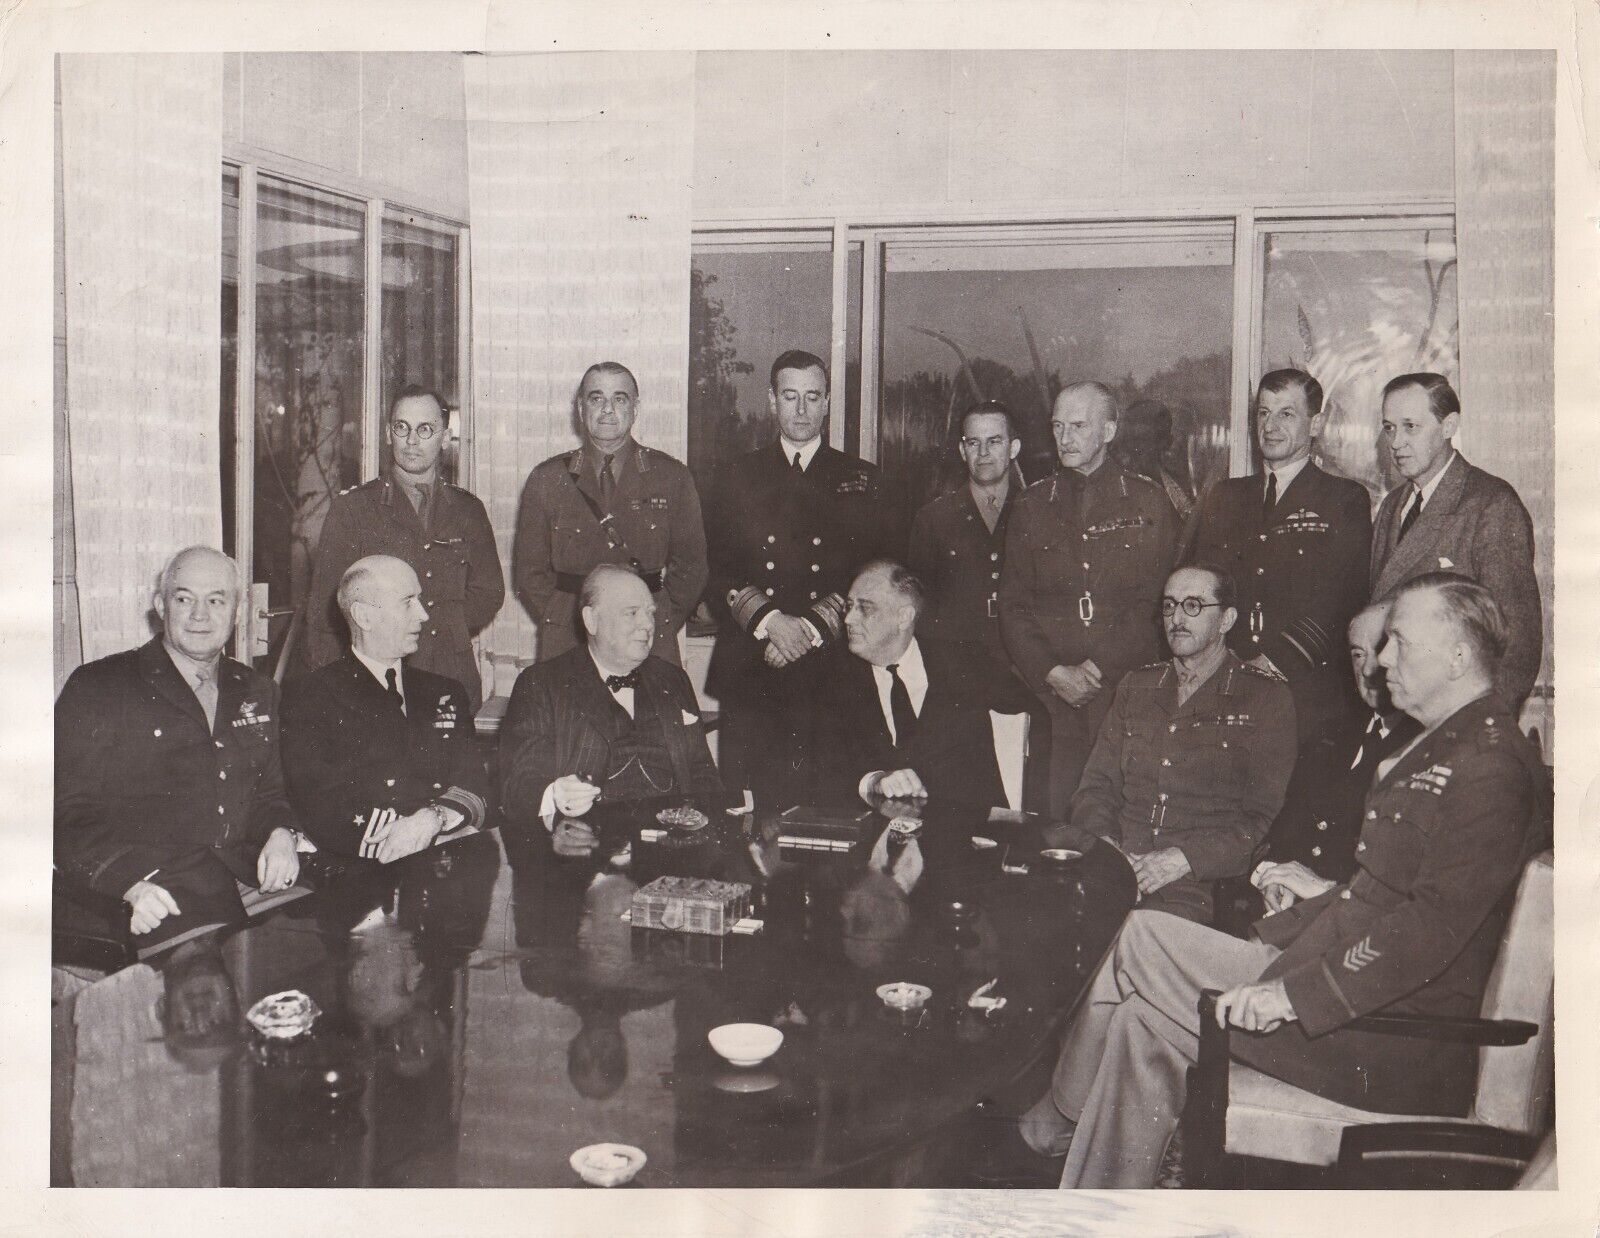 1943 President Roosevelt &Winston Churchill with high-ranking military leaders